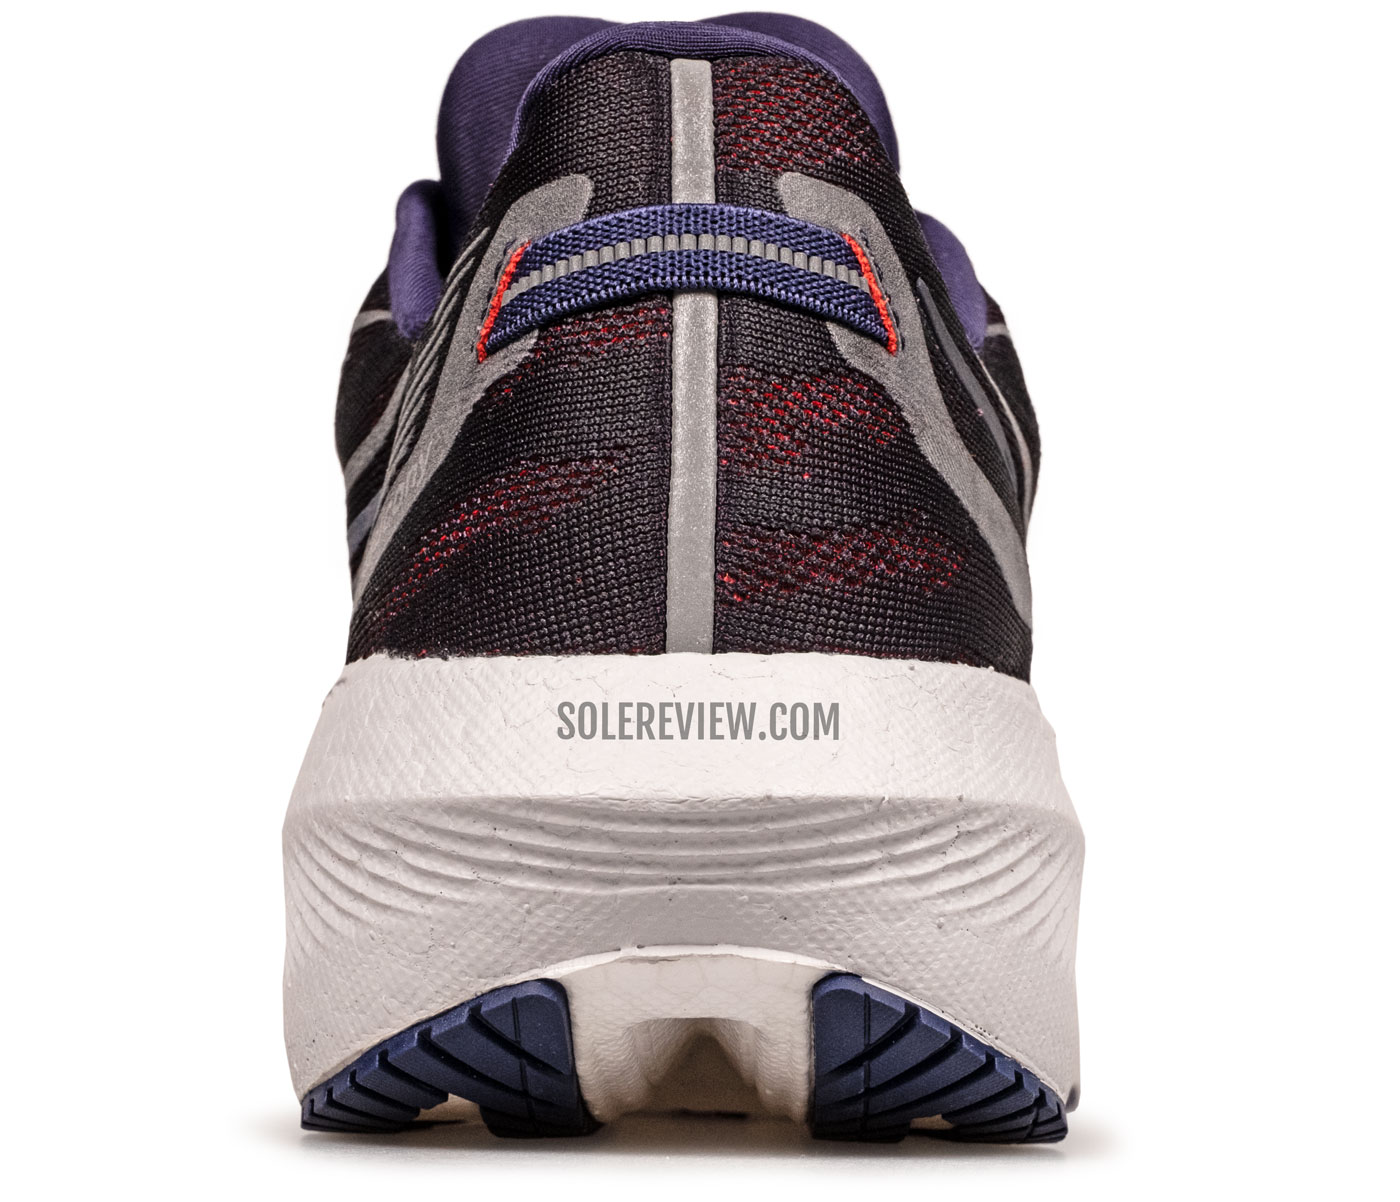 The rear view of the Saucony Triumph 20.